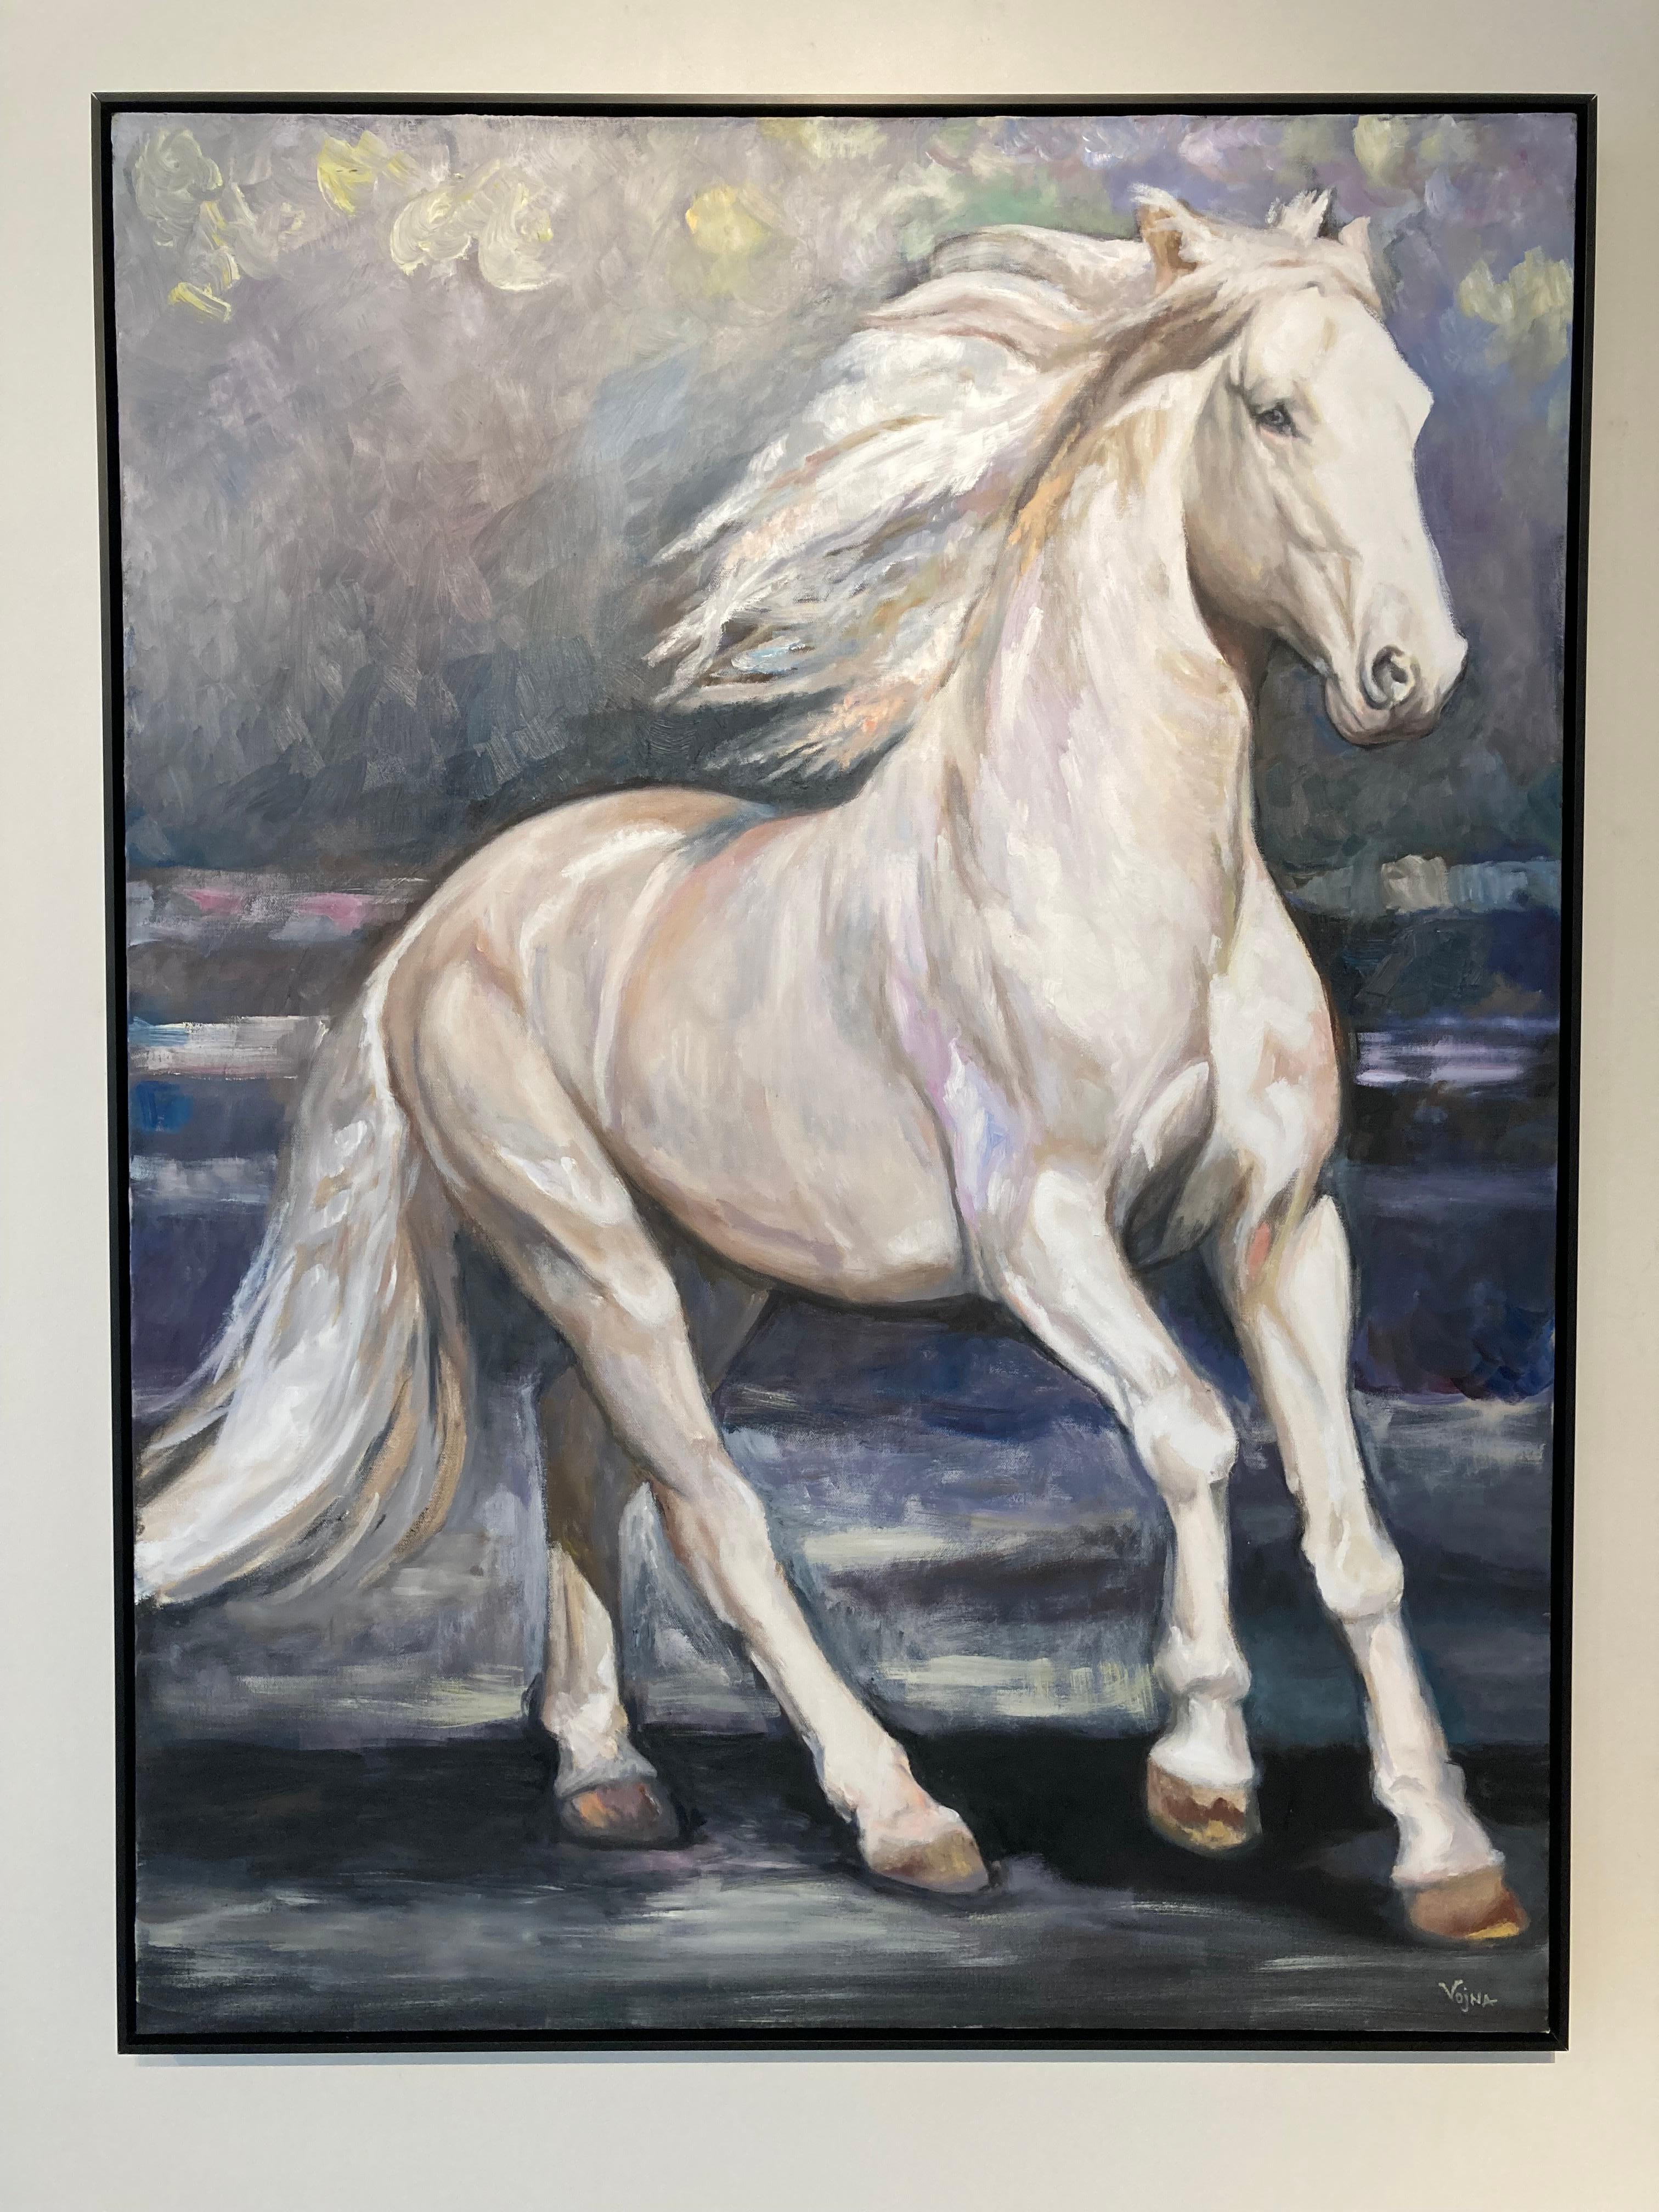 "Conquest," by Vojna Bastovanovic Casteel, is a framed oil on canvas painting from 2021 that features an image of a running horse. Rendered in cool values of blue, purple, white, gray, the painting also features accents of warmer colors like pinks,